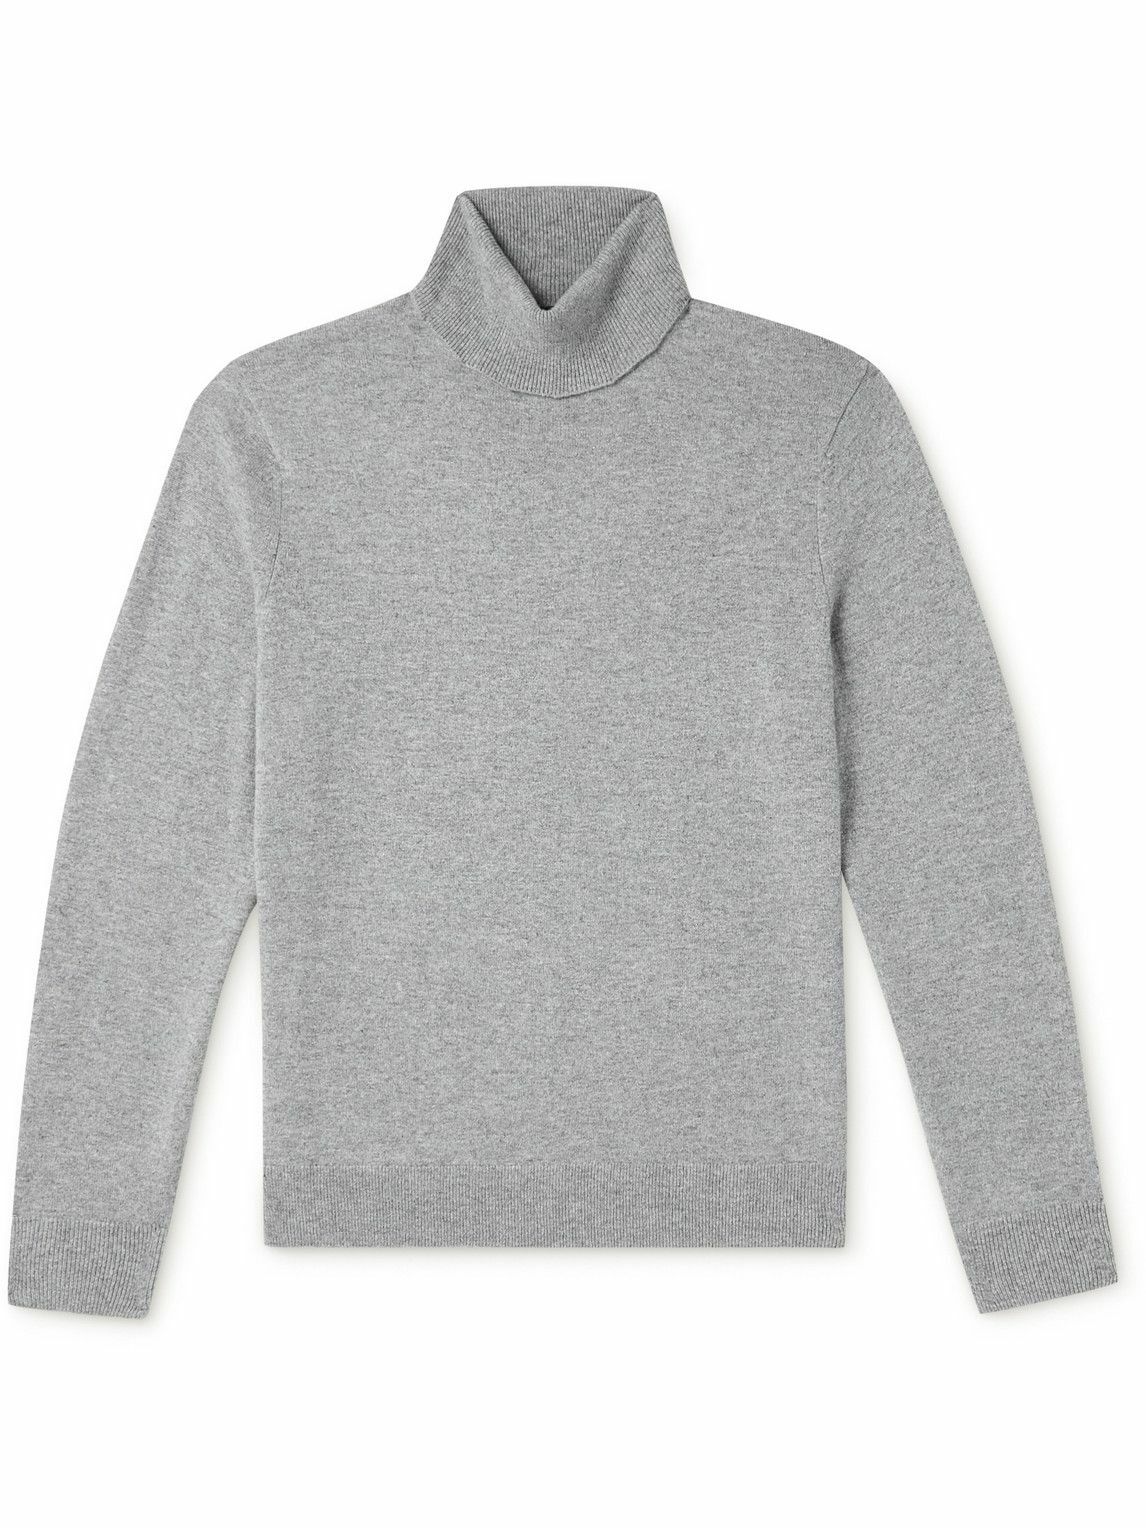 Theory - Hilles Cashmere Rollneck Sweater - Gray Theory